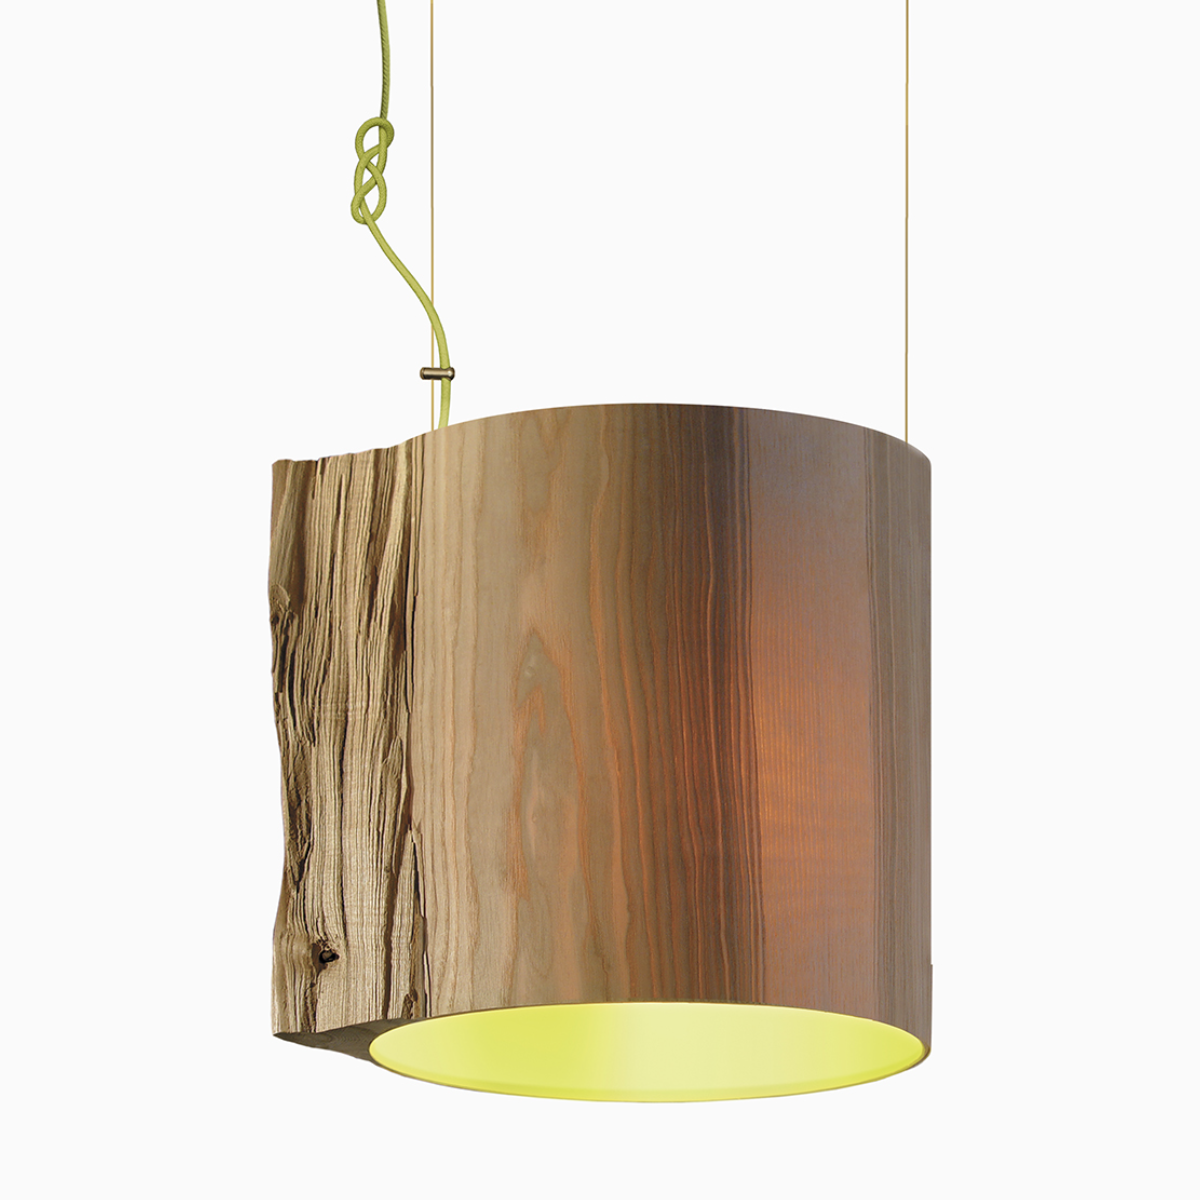 THE WISE ONE - Pendant Light